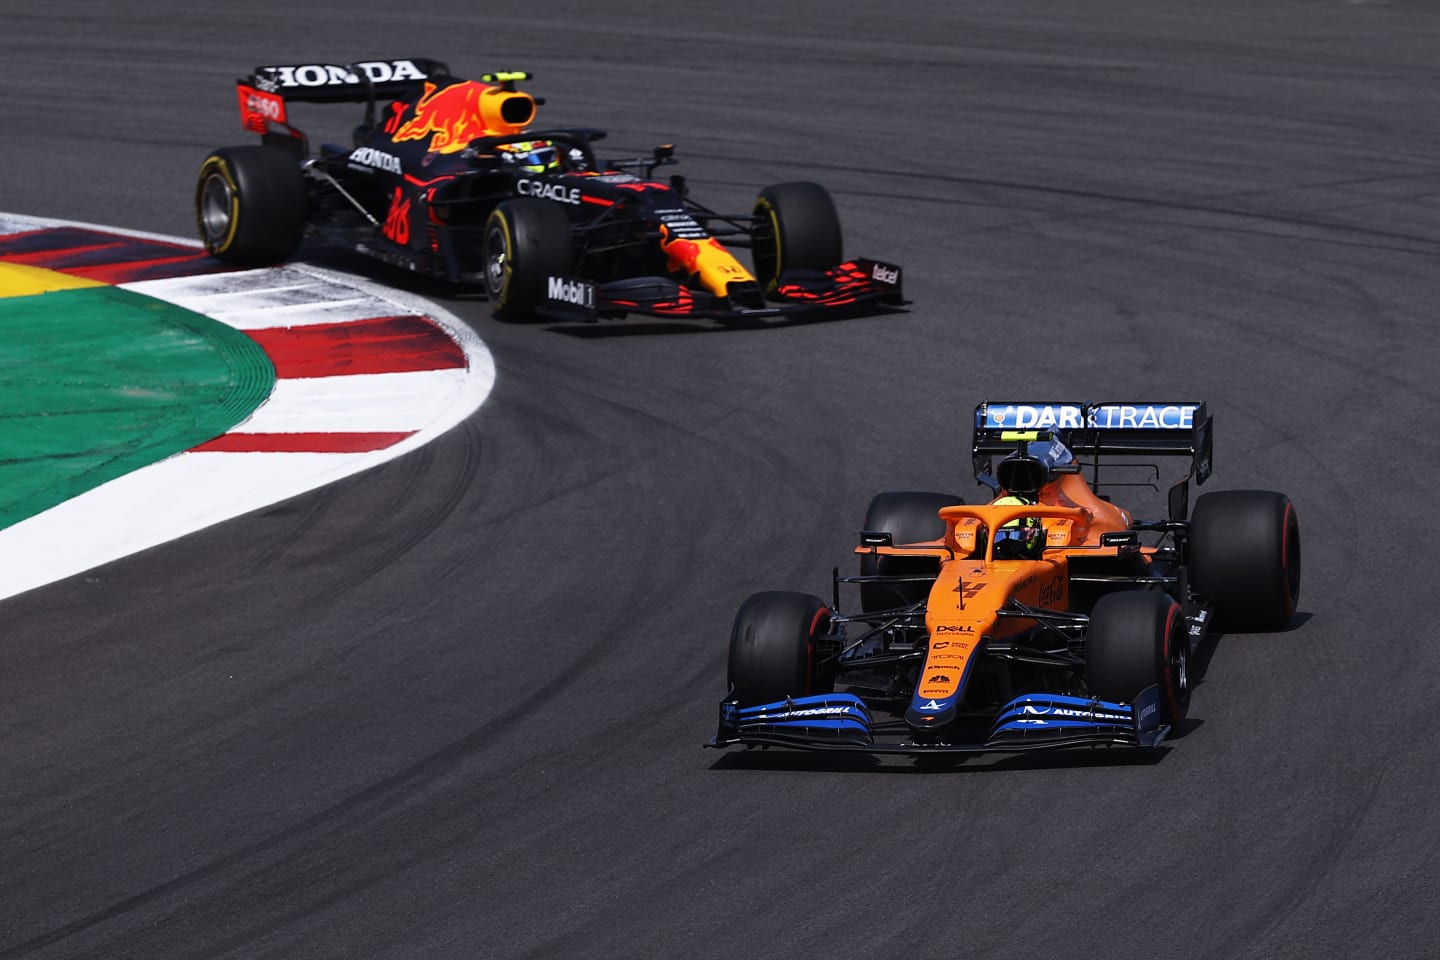 PORTIMAO, PORTUGAL - MAY 02: Lando Norris of Great Britain driving the (4) McLaren F1 Team MCL35M Mercedes leads Sergio Perez of Mexico driving the (11) Red Bull Racing RB16B Honda on track during the F1 Grand Prix of Portugal at Autodromo Internacional Do Algarve on May 02, 2021 in Portimao, Portugal. (Photo by Lars Baron/Getty Images)